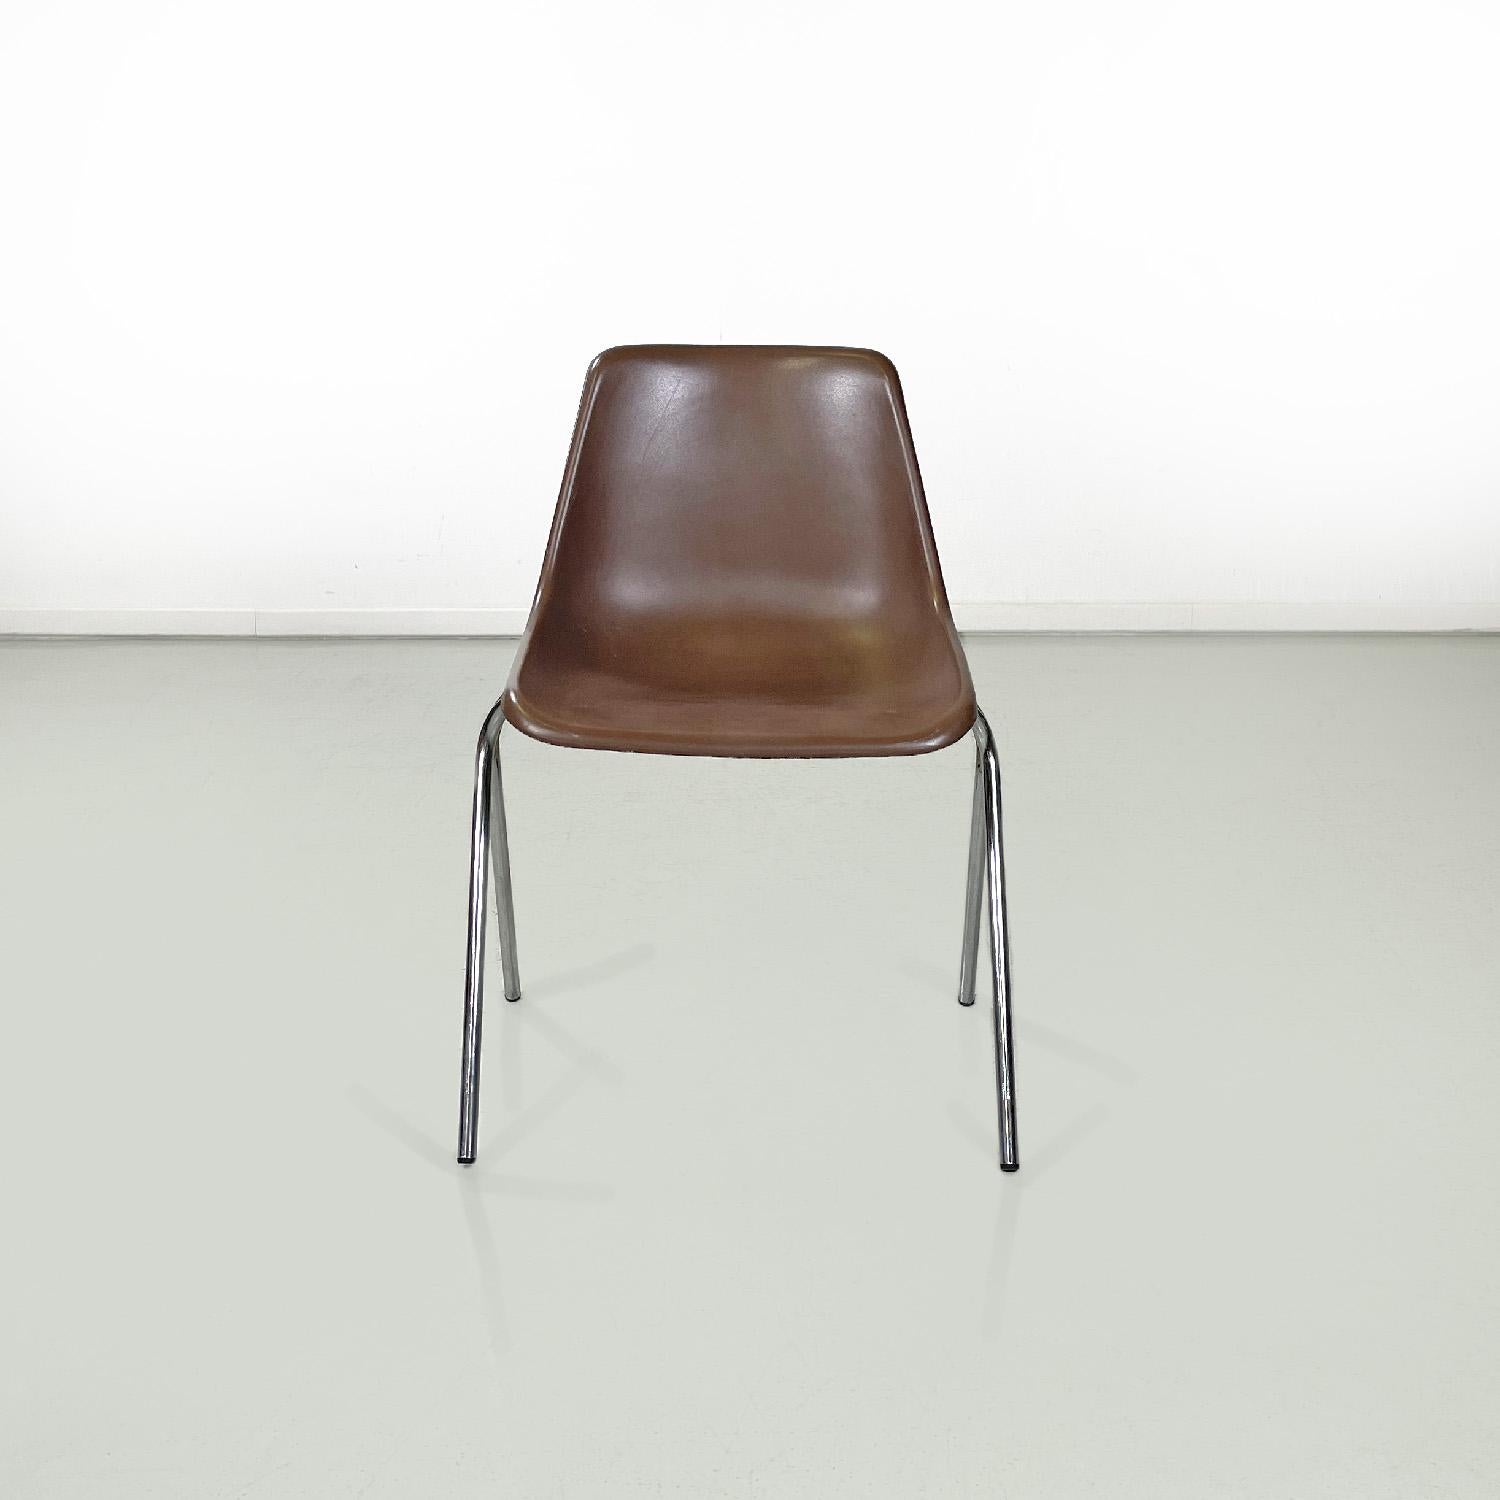 Modern Italian modern stackable chairs by Proinco in brown plastic, 1970s For Sale